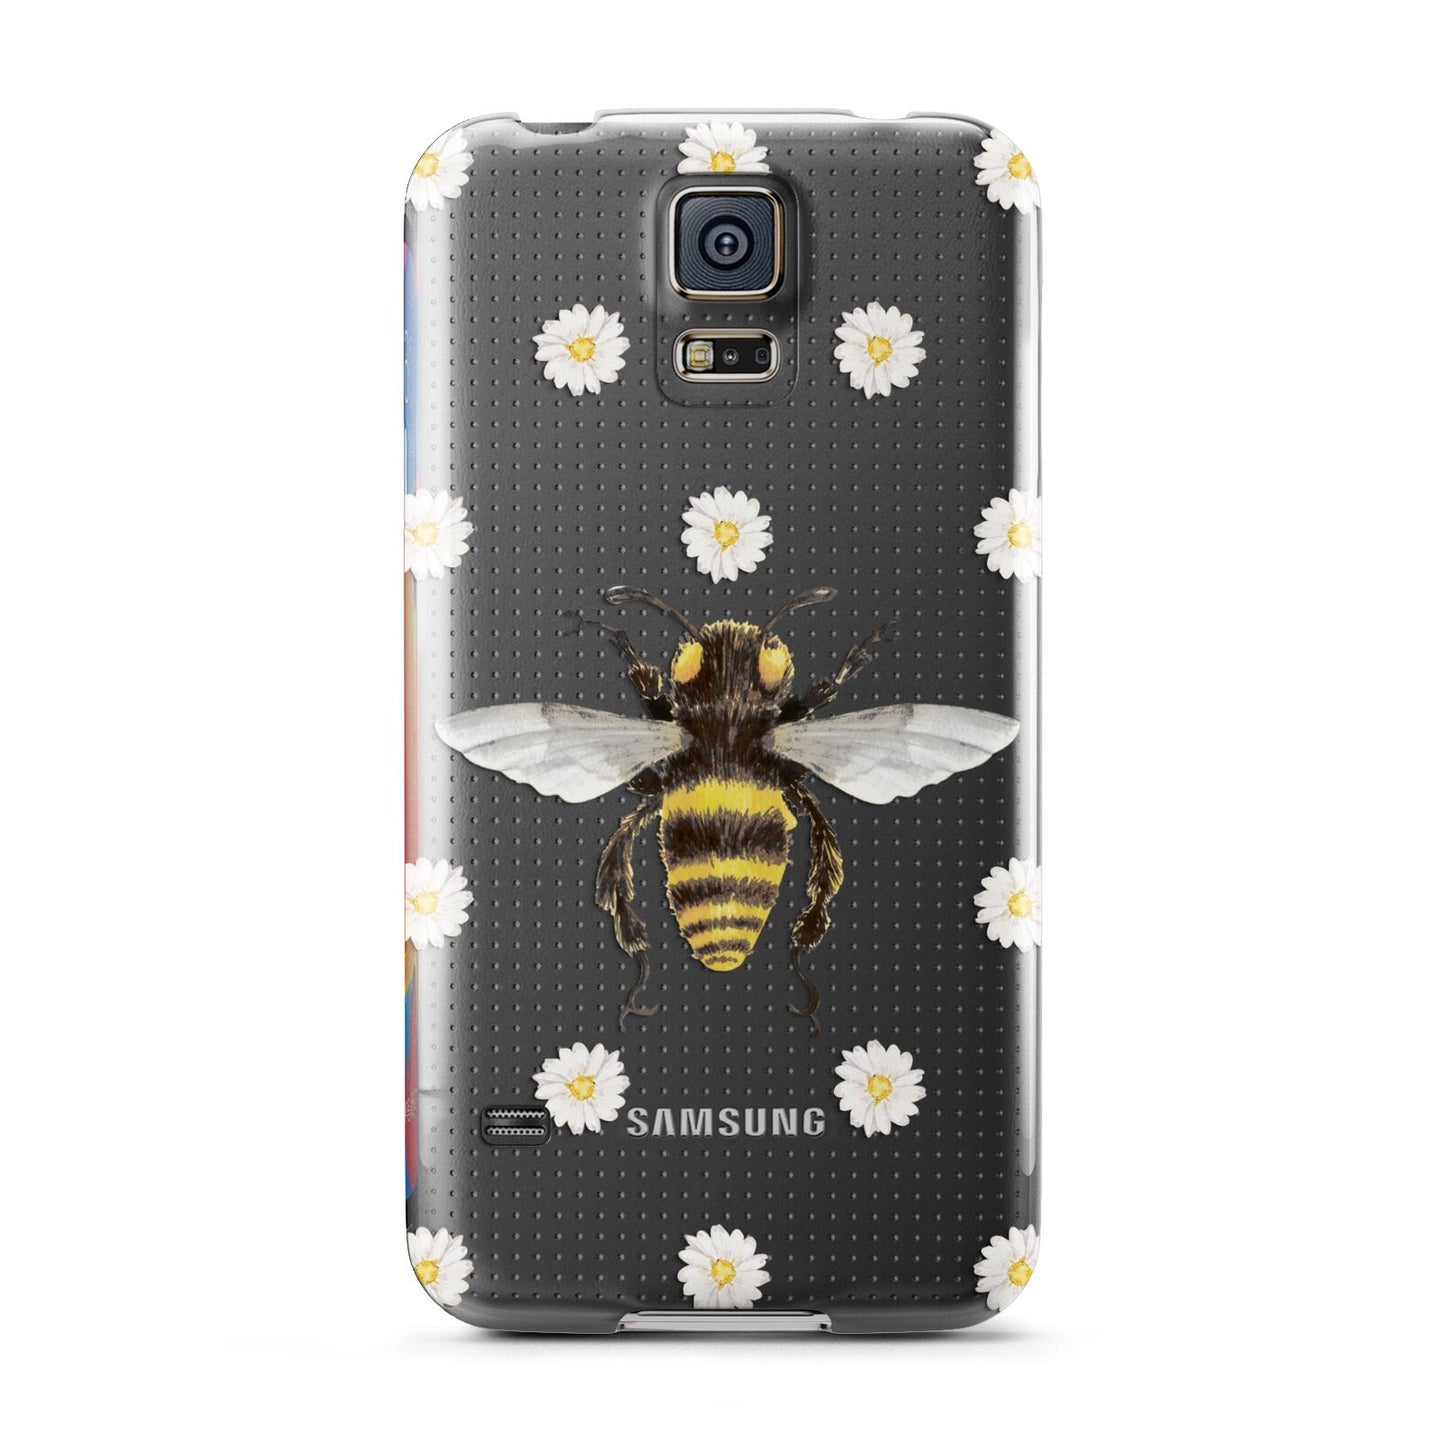 Bee Illustration with Daisies Samsung Galaxy S5 Case